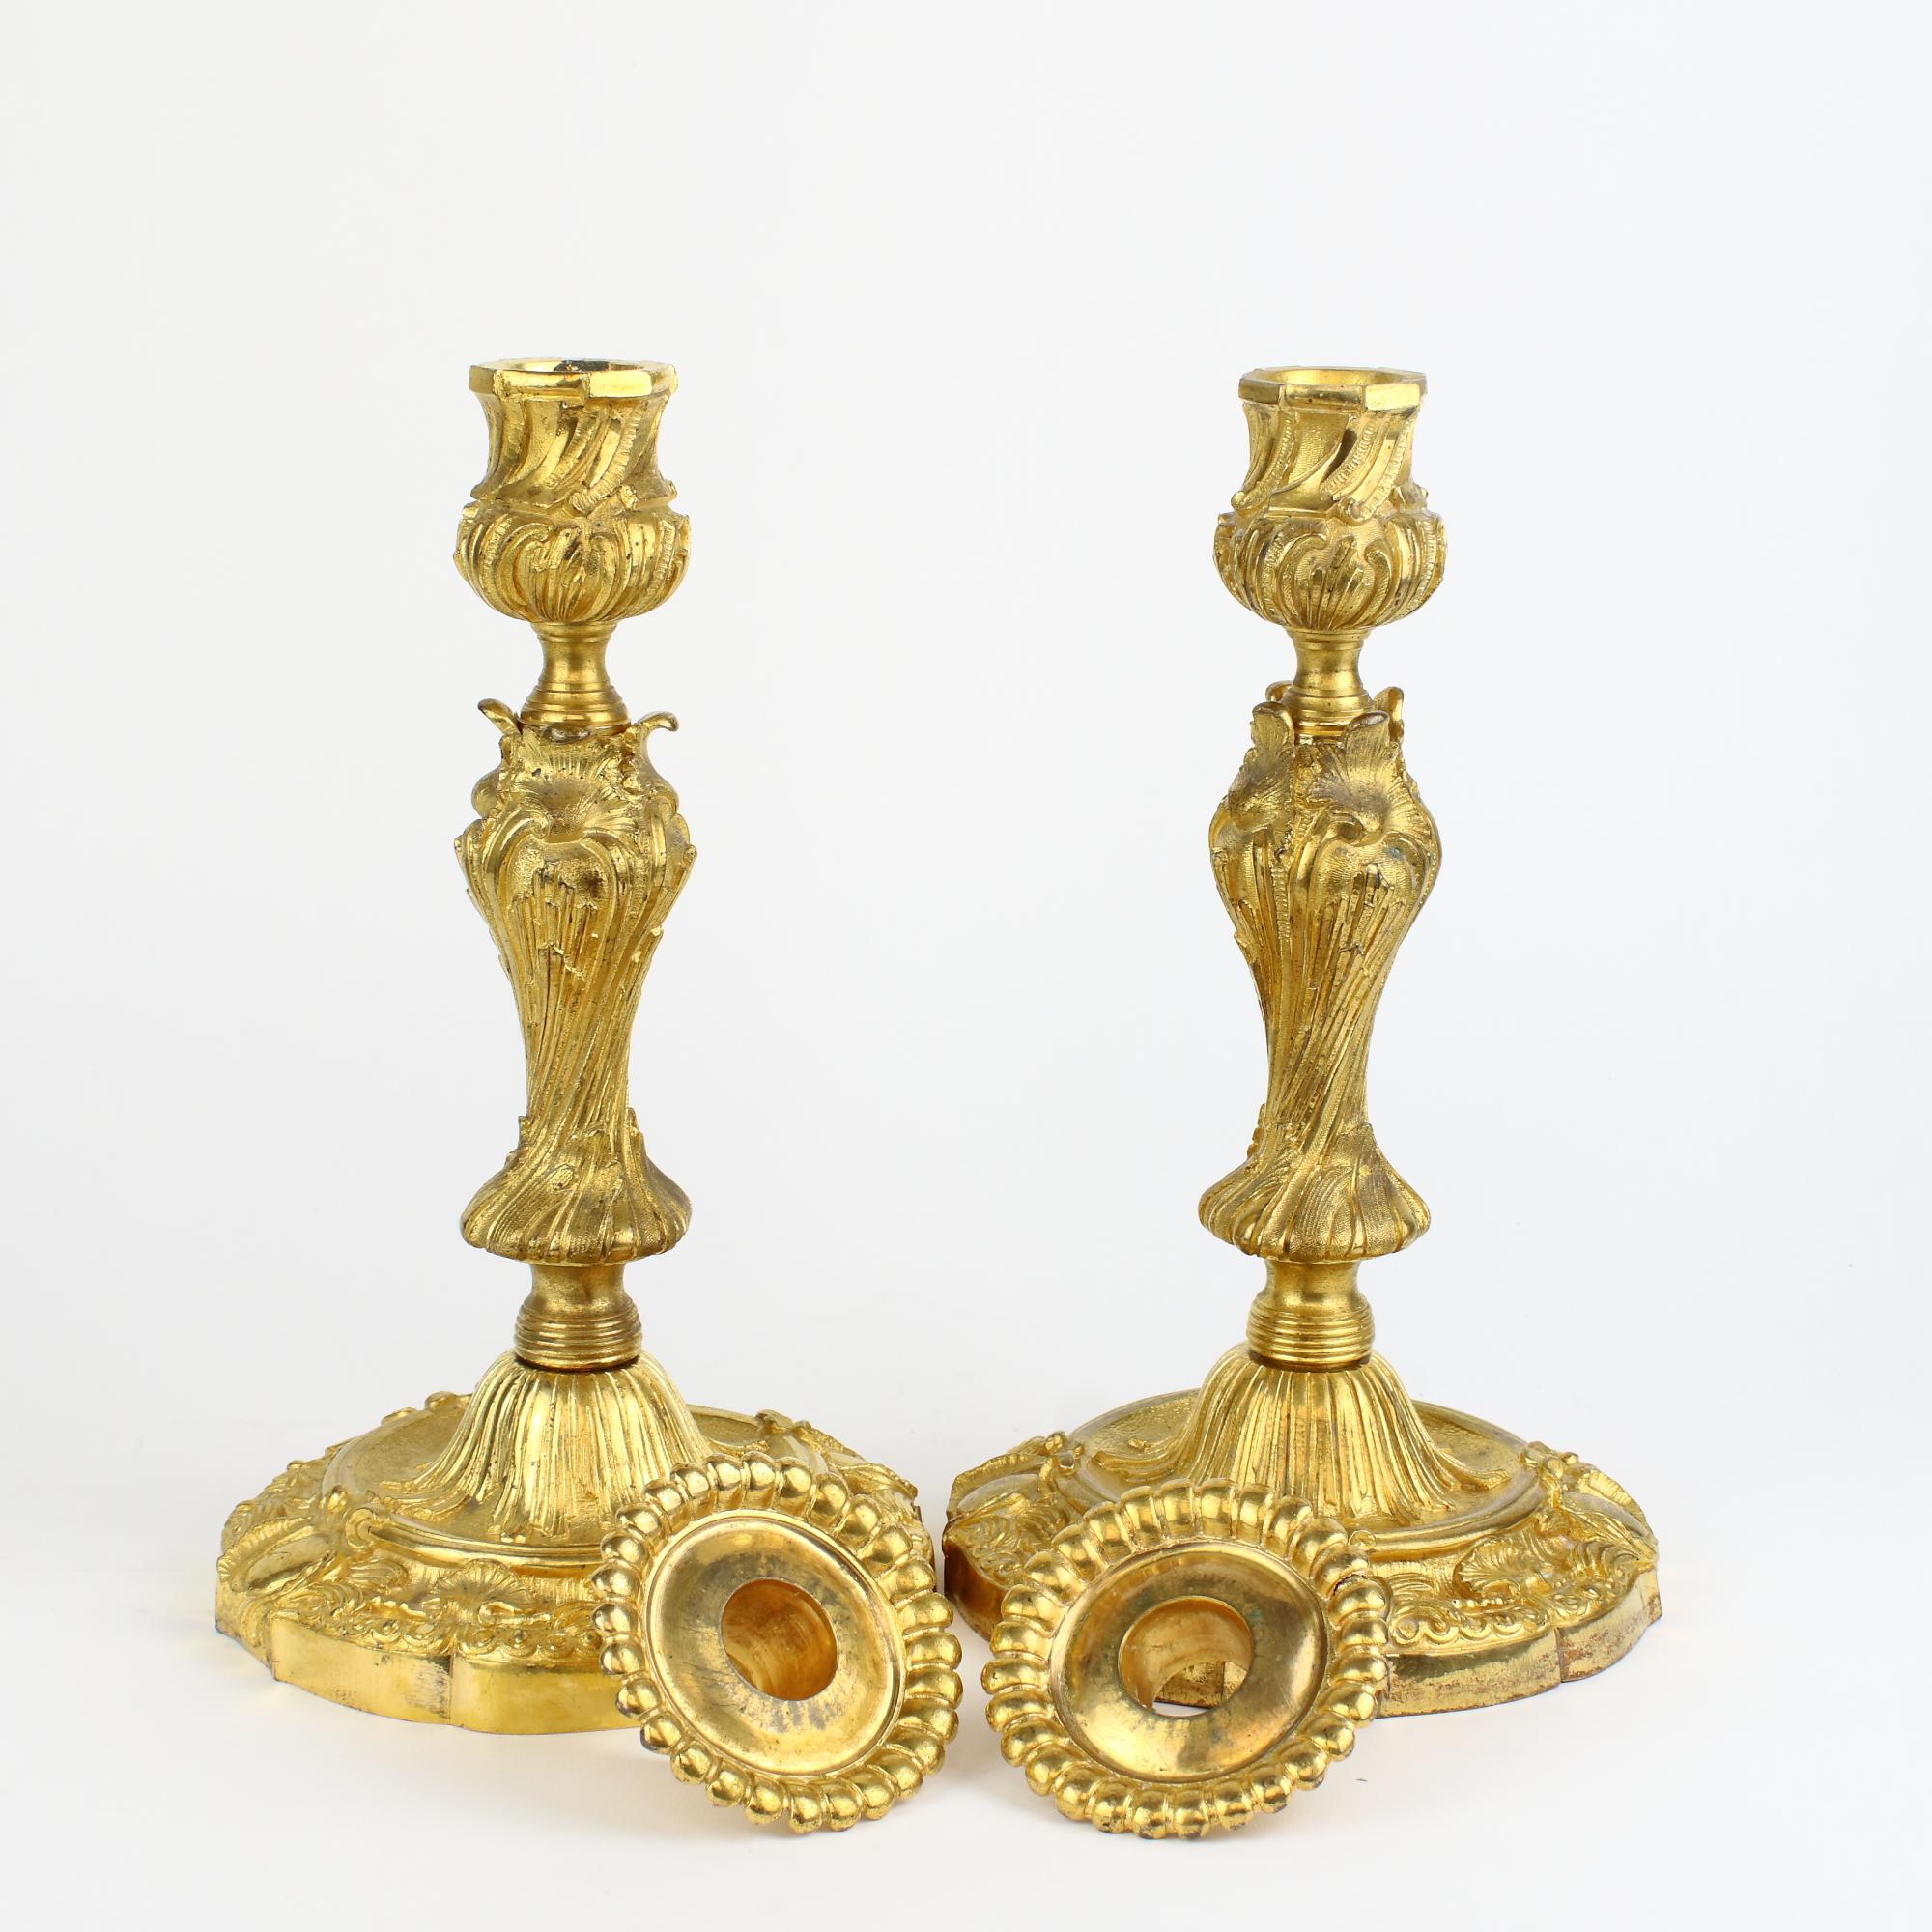 Mid 19th Century French Henri Picard Pair of Louis XV Gilt Bronze Candlesticks For Sale 6